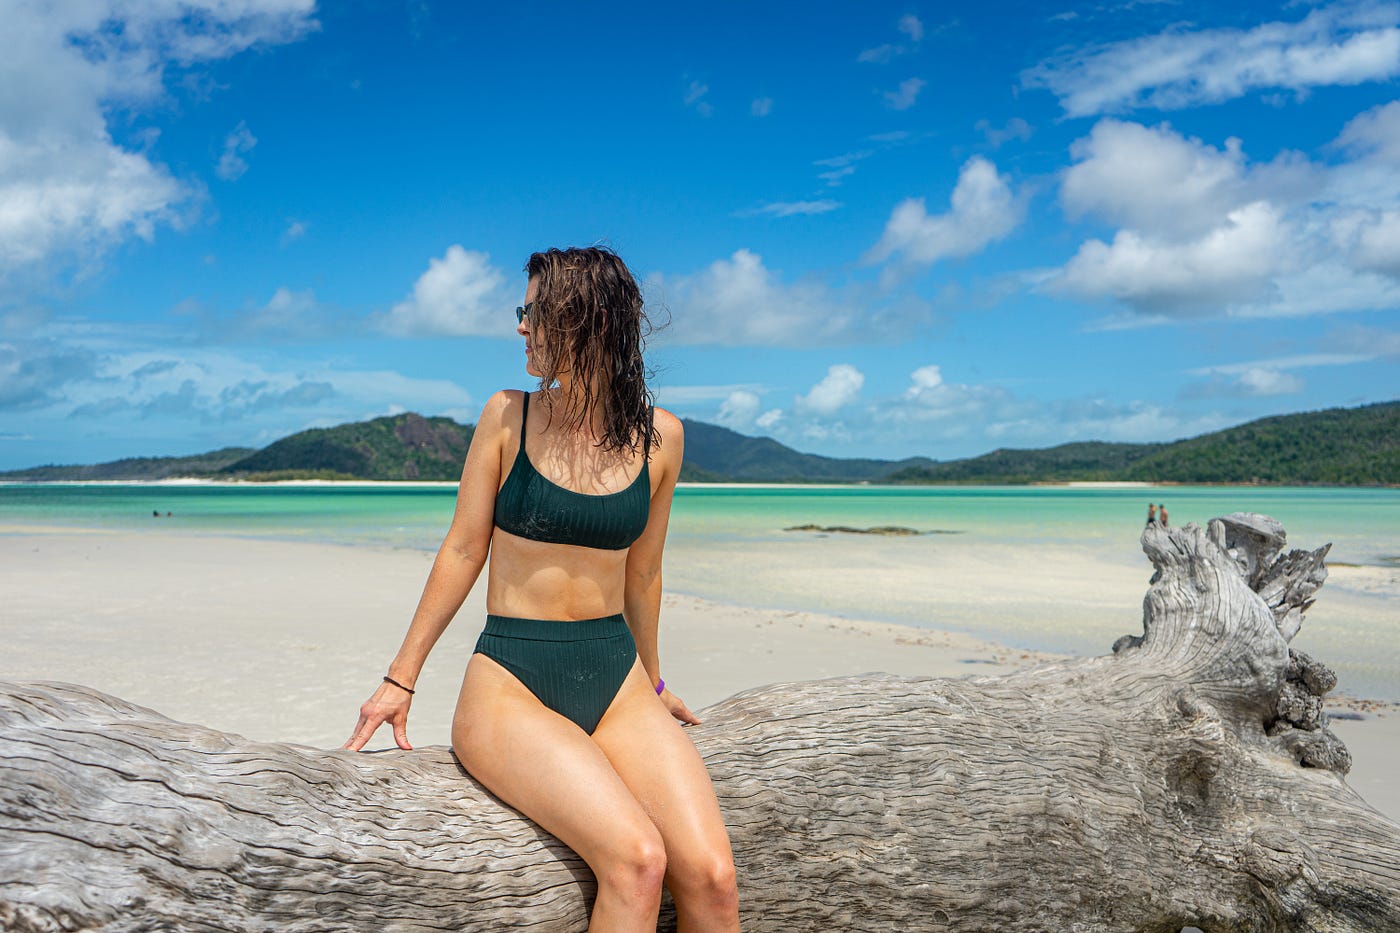 3 Lessons In Confidence From A Spontaneous Bikini Date by Alexandra Ringer